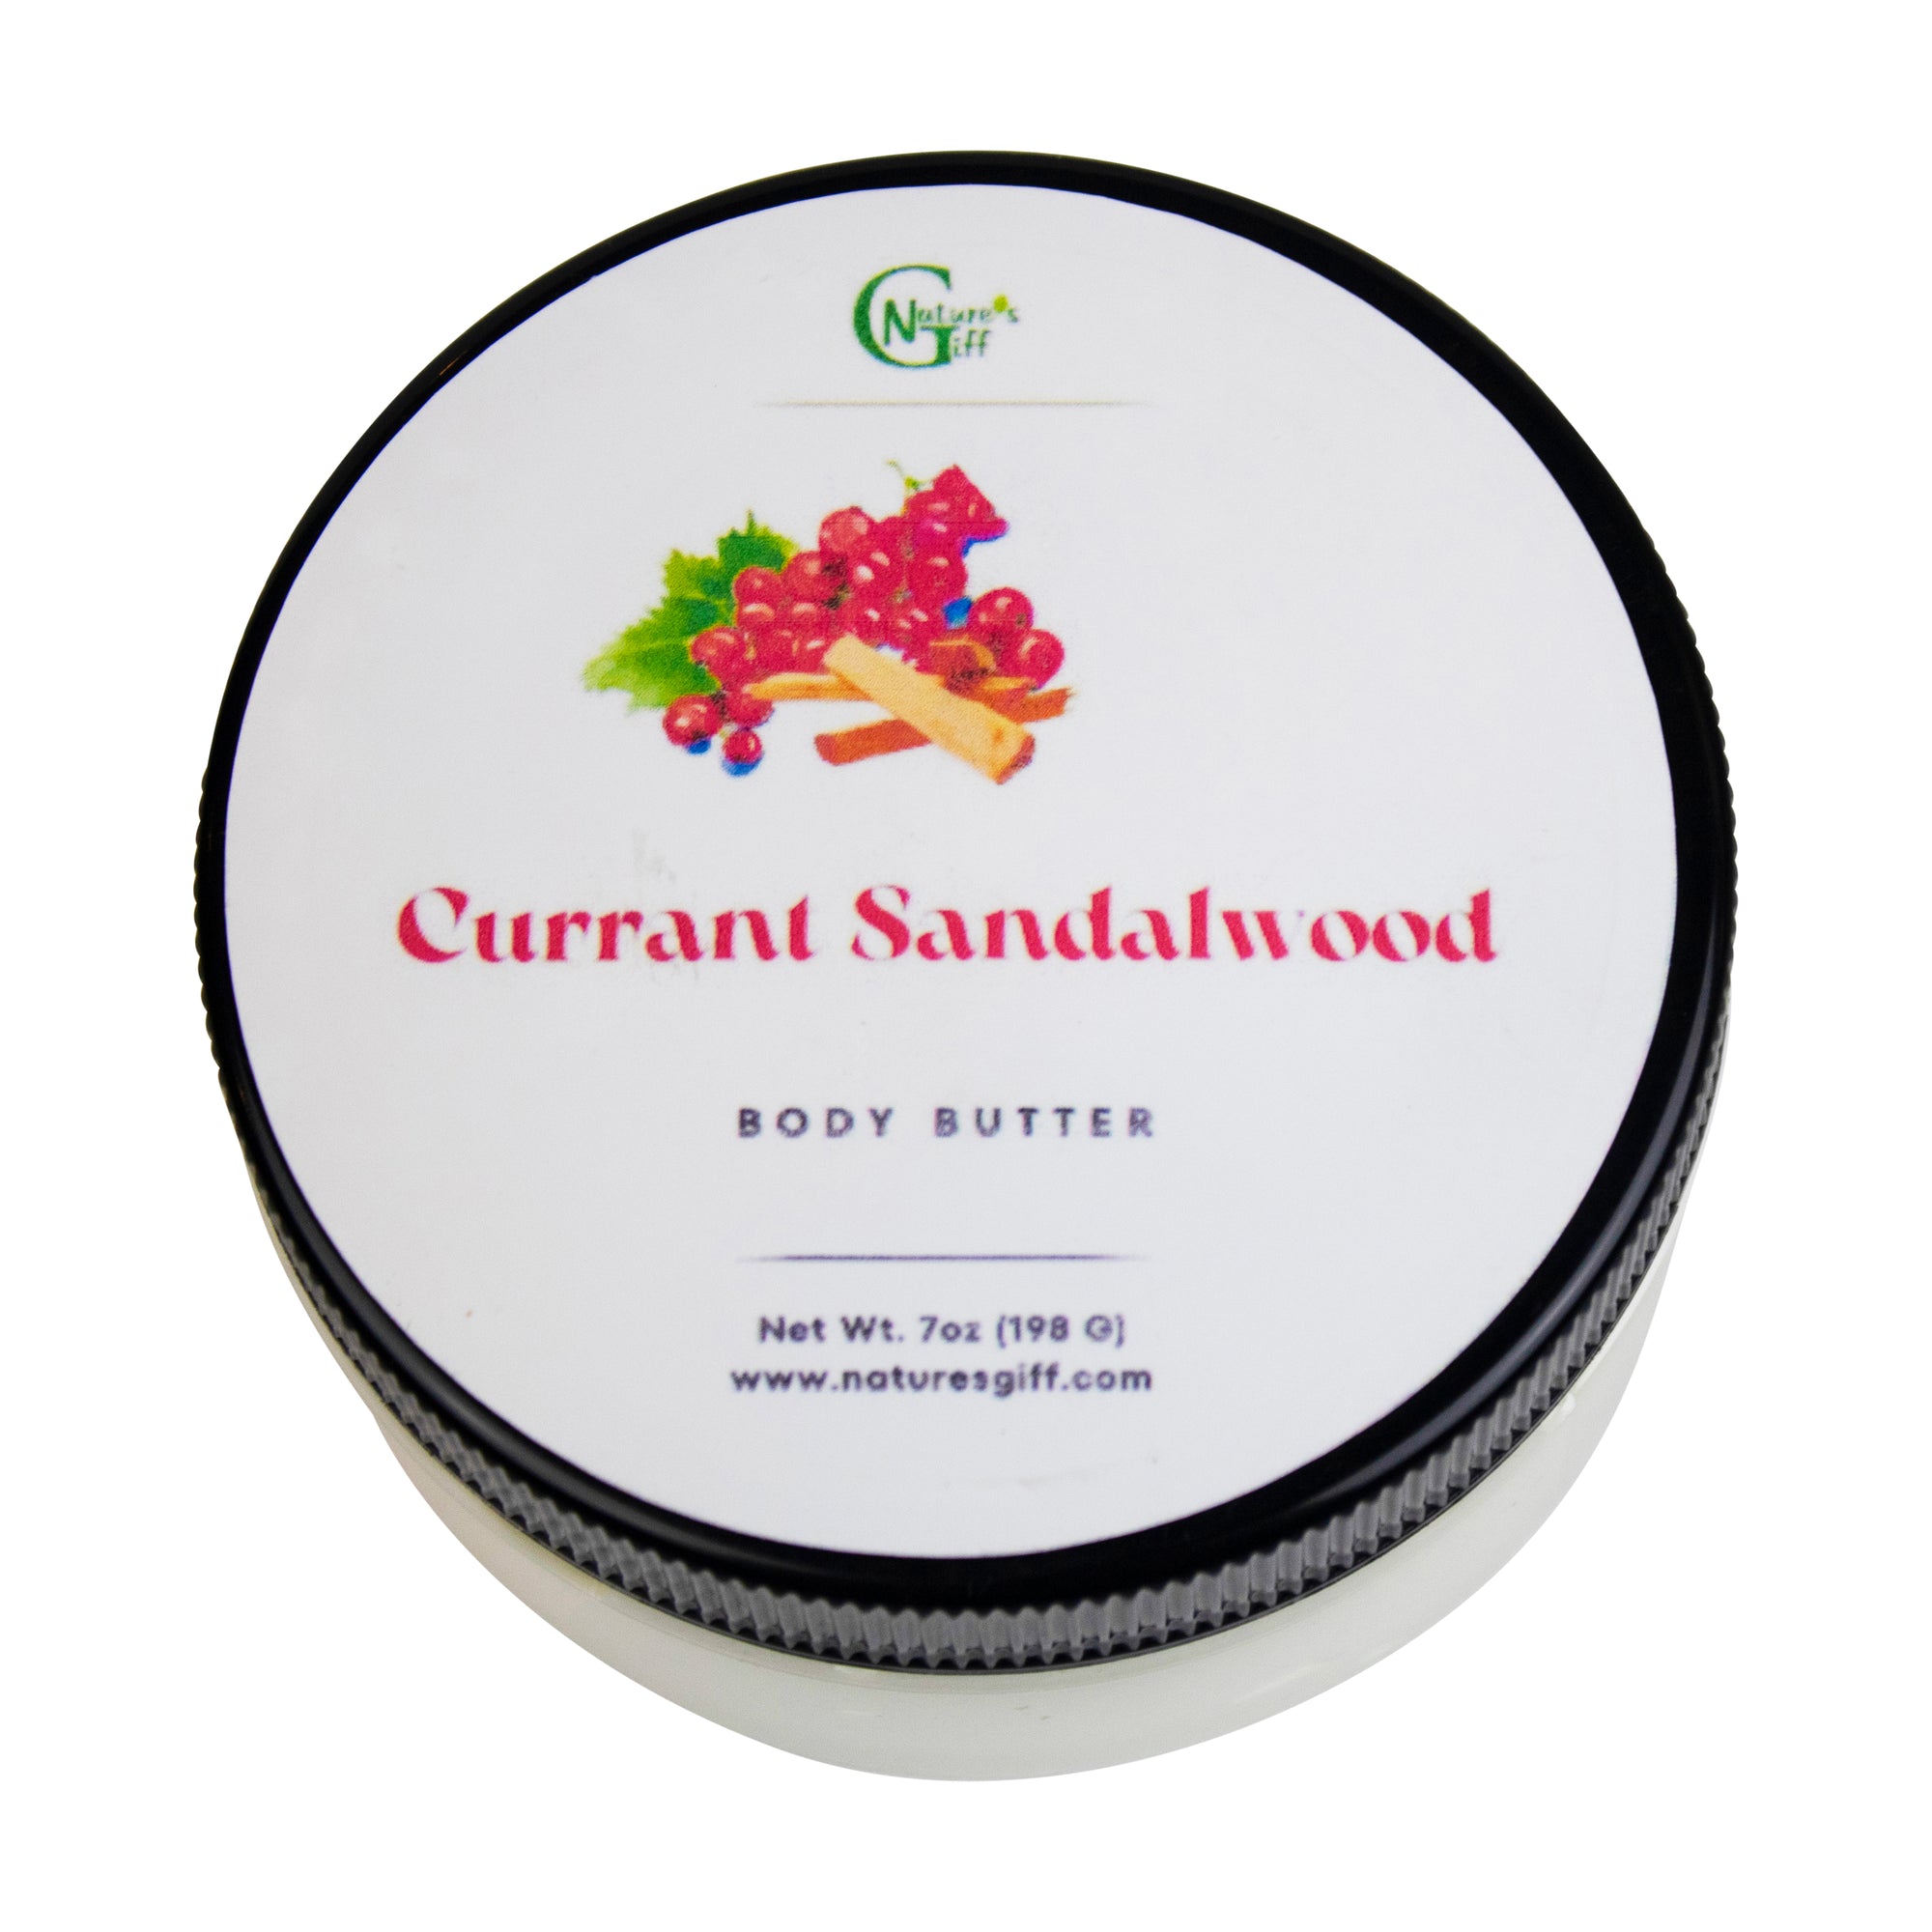 Currant Sandalwood Body Butter